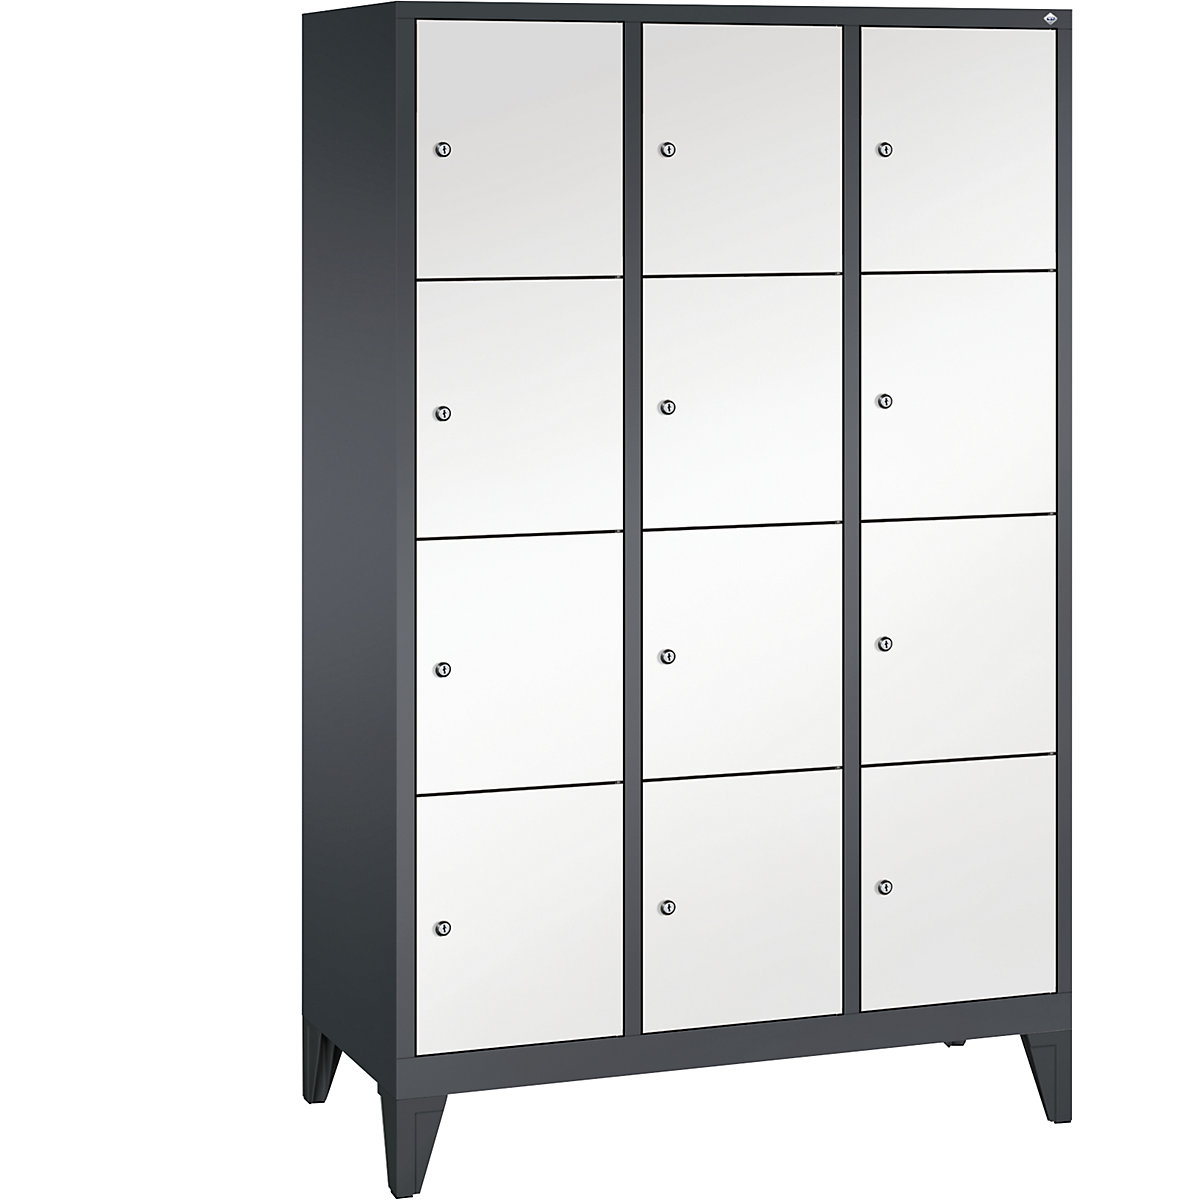 CLASSIC locker unit with feet – C+P, 3 compartments, 4 shelf compartments each, compartment width 400 mm, black grey / traffic white-14